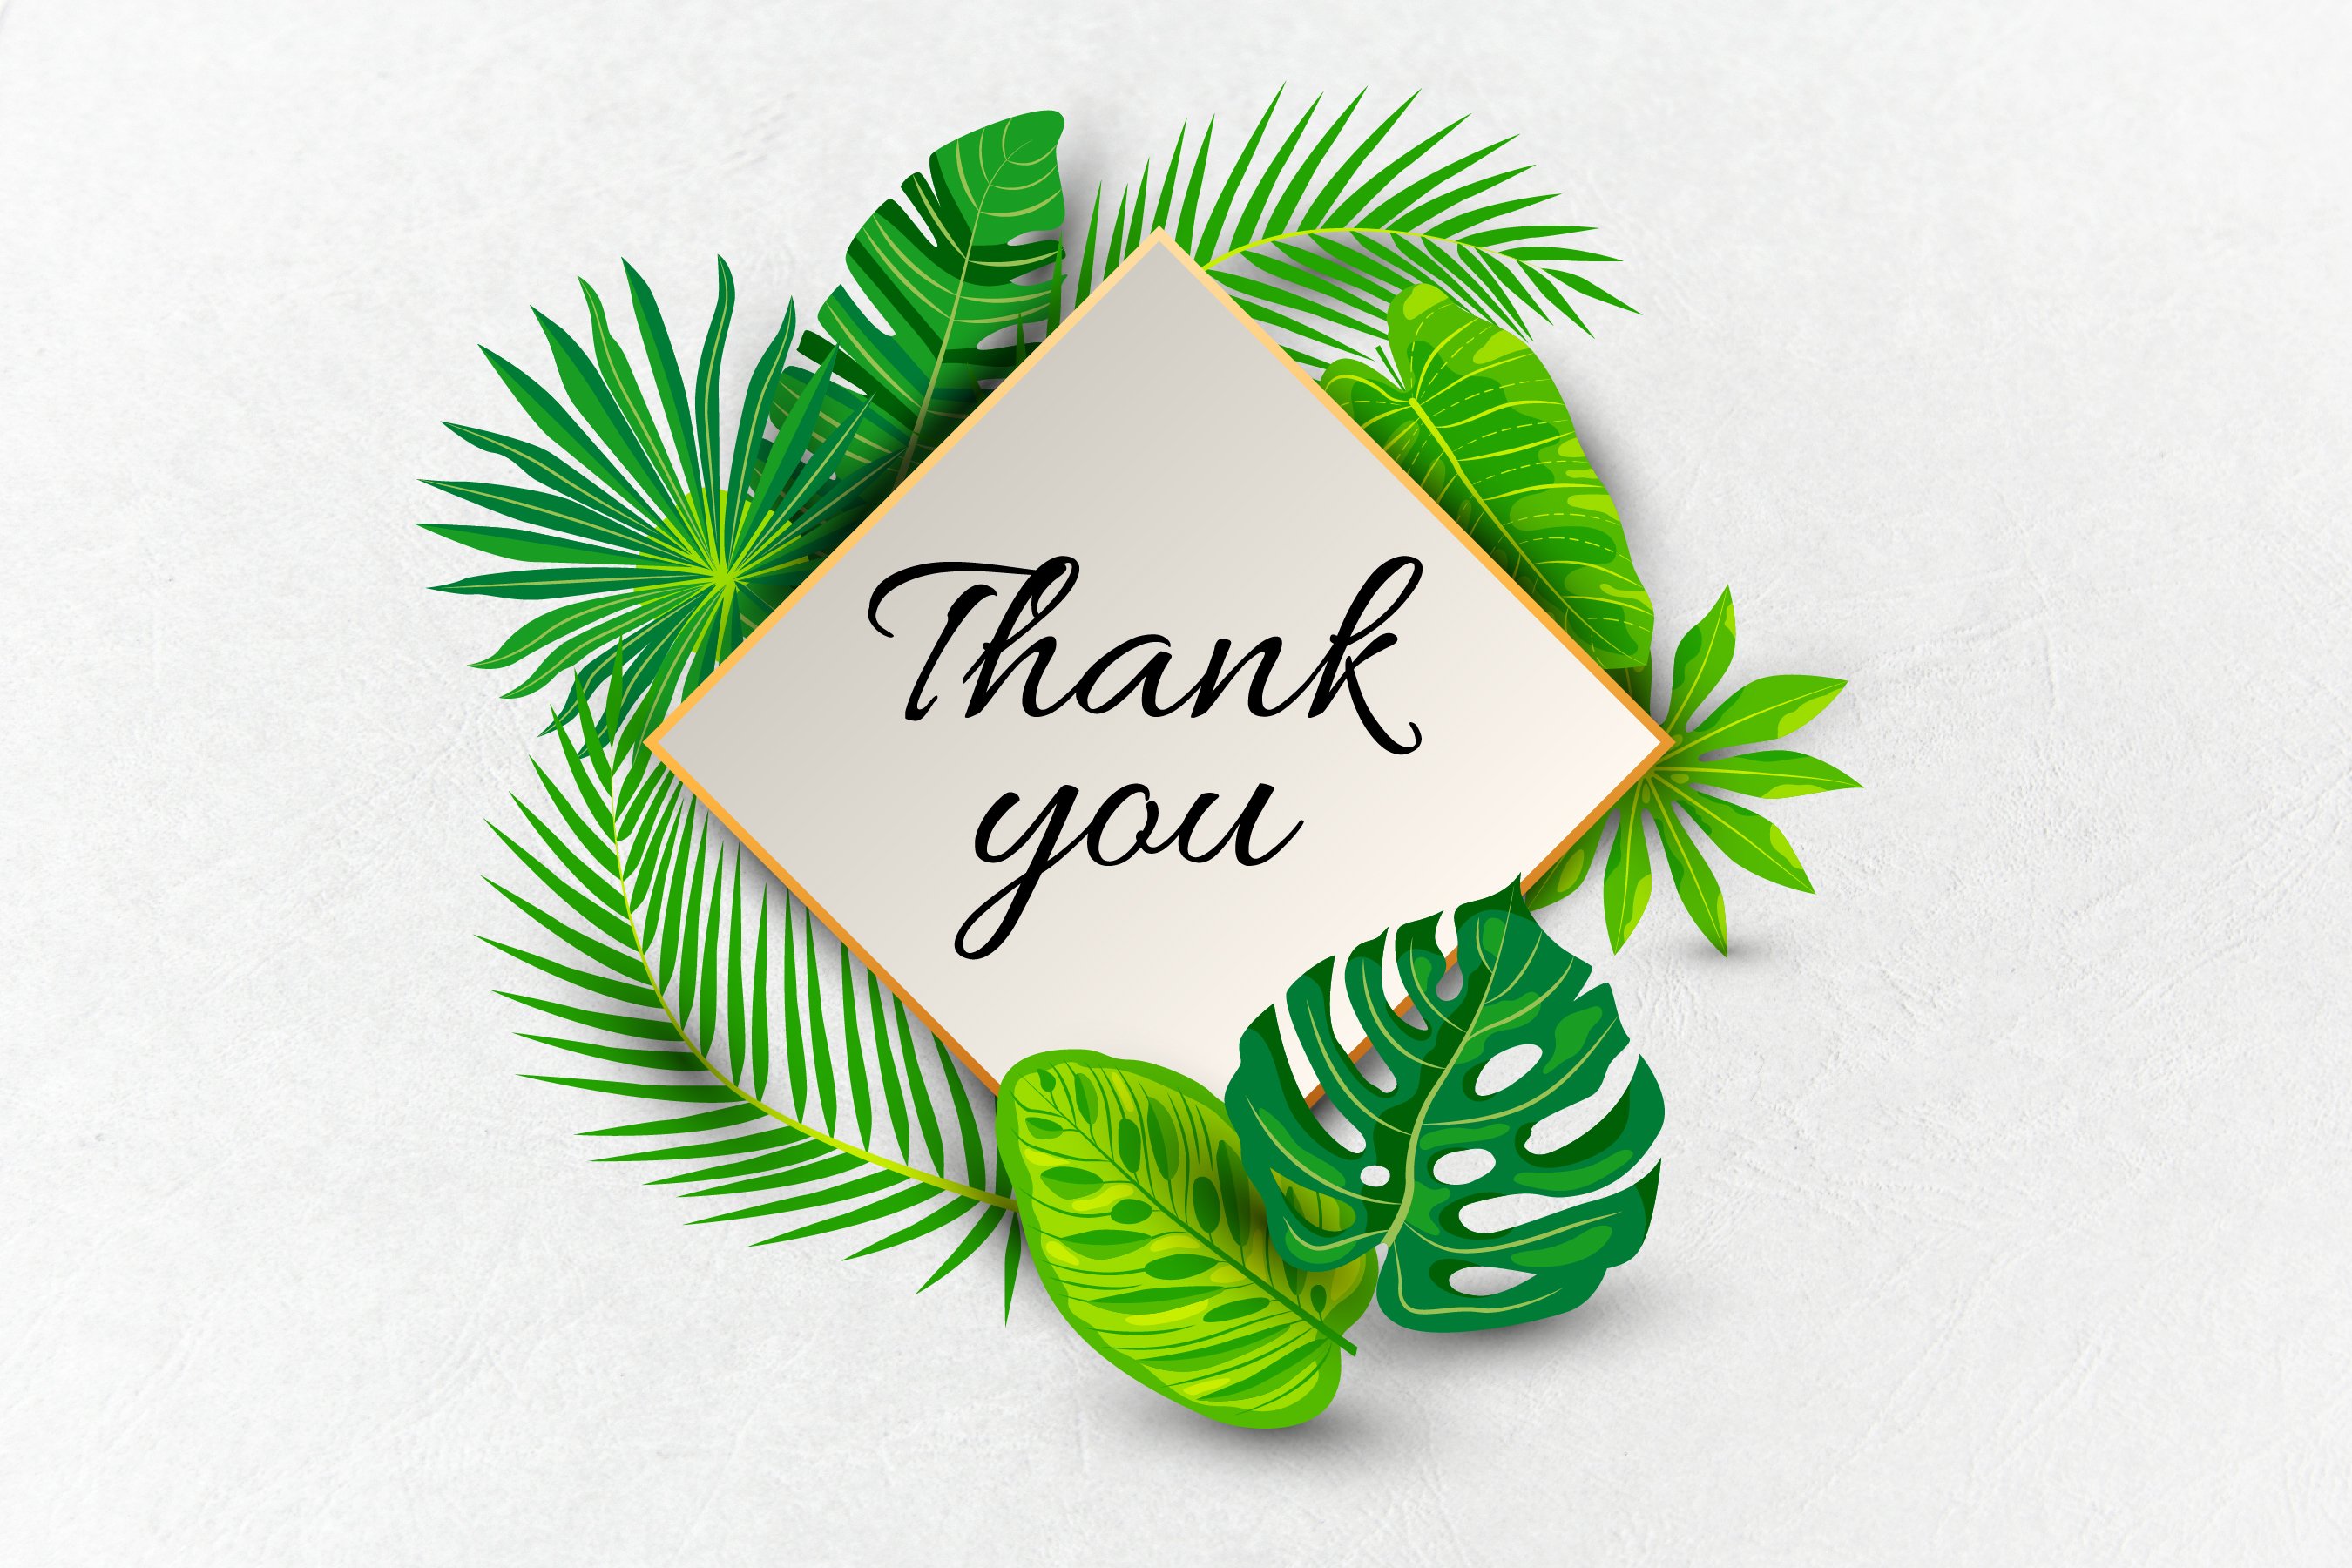 Thank you card surrounded by tropical leaves.